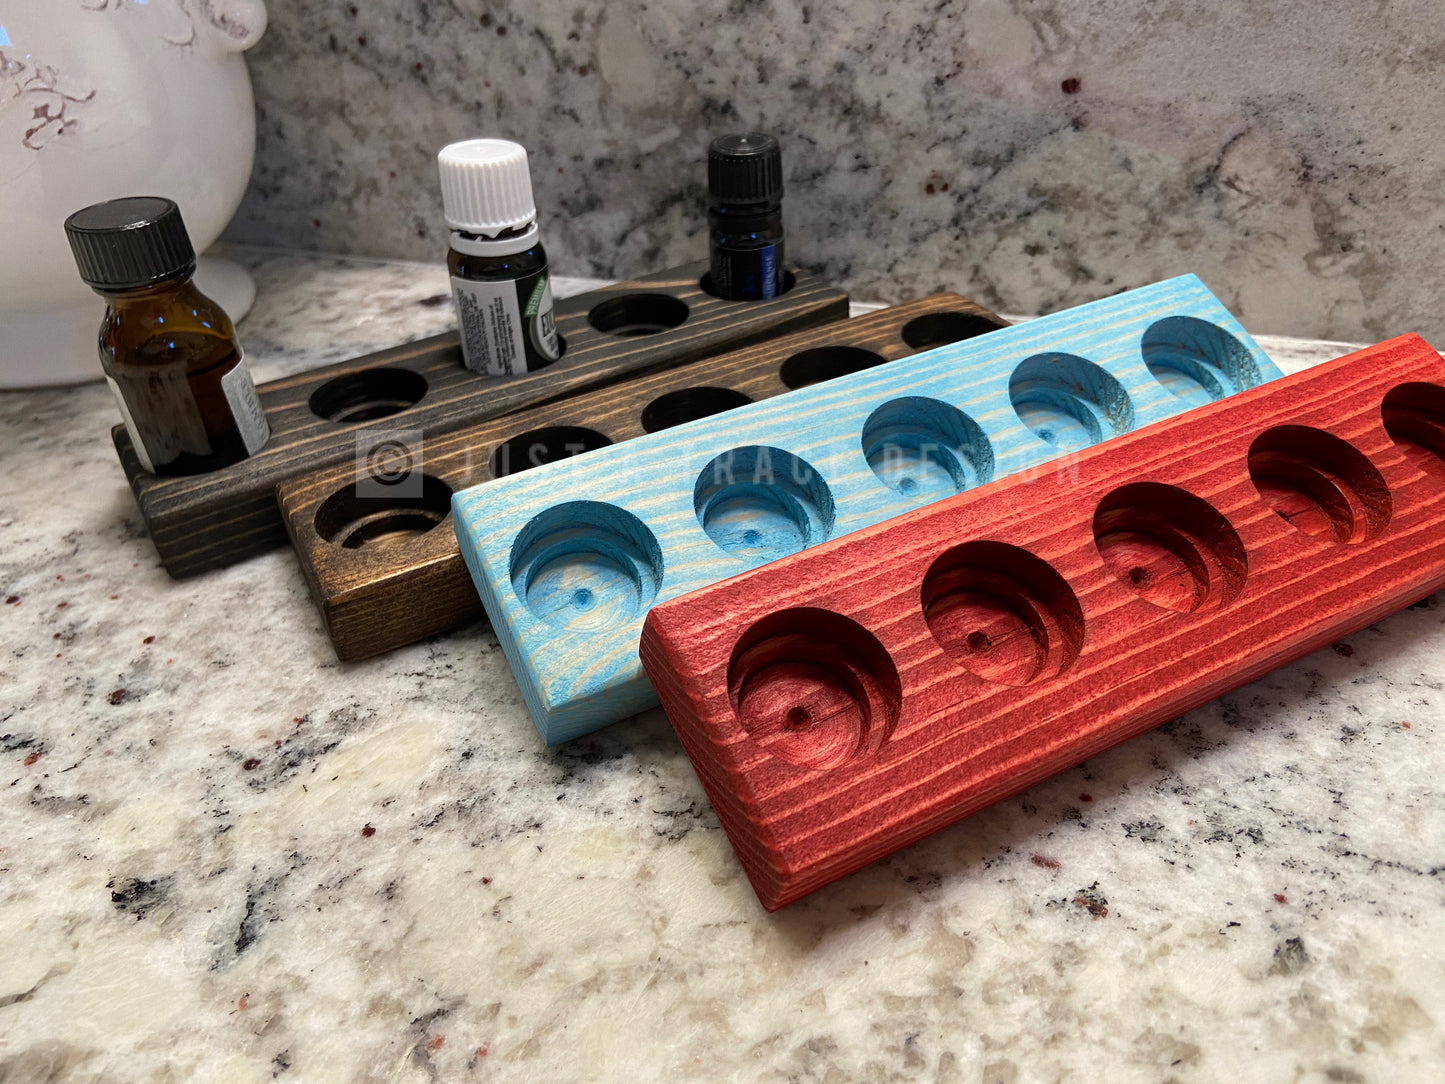 Essential Oil Holder - Colors - Oil Organizer - Table Top - 5 Bottle Holder - Tray - Storage Display - 5ml - 10ml - 15ml